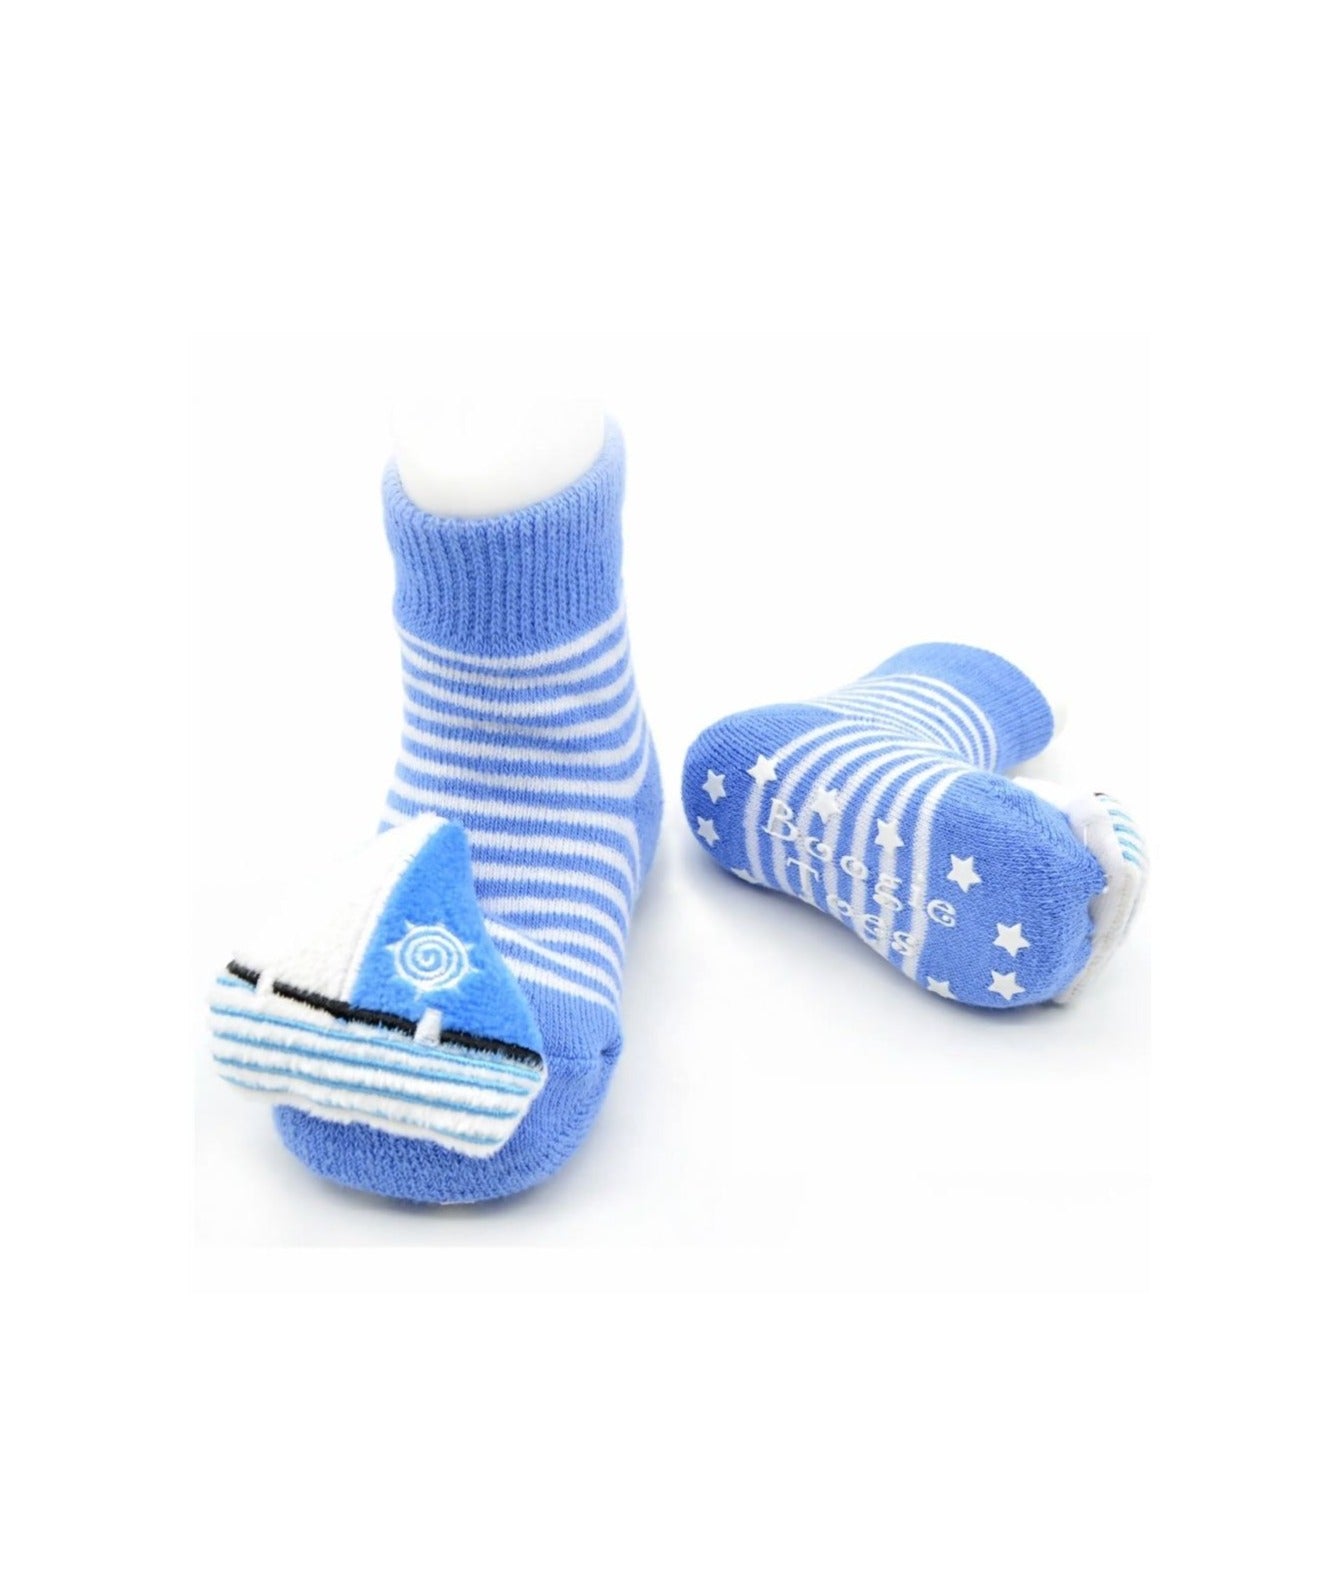 bleu and white striped socks with blue and white sailboats on each foot